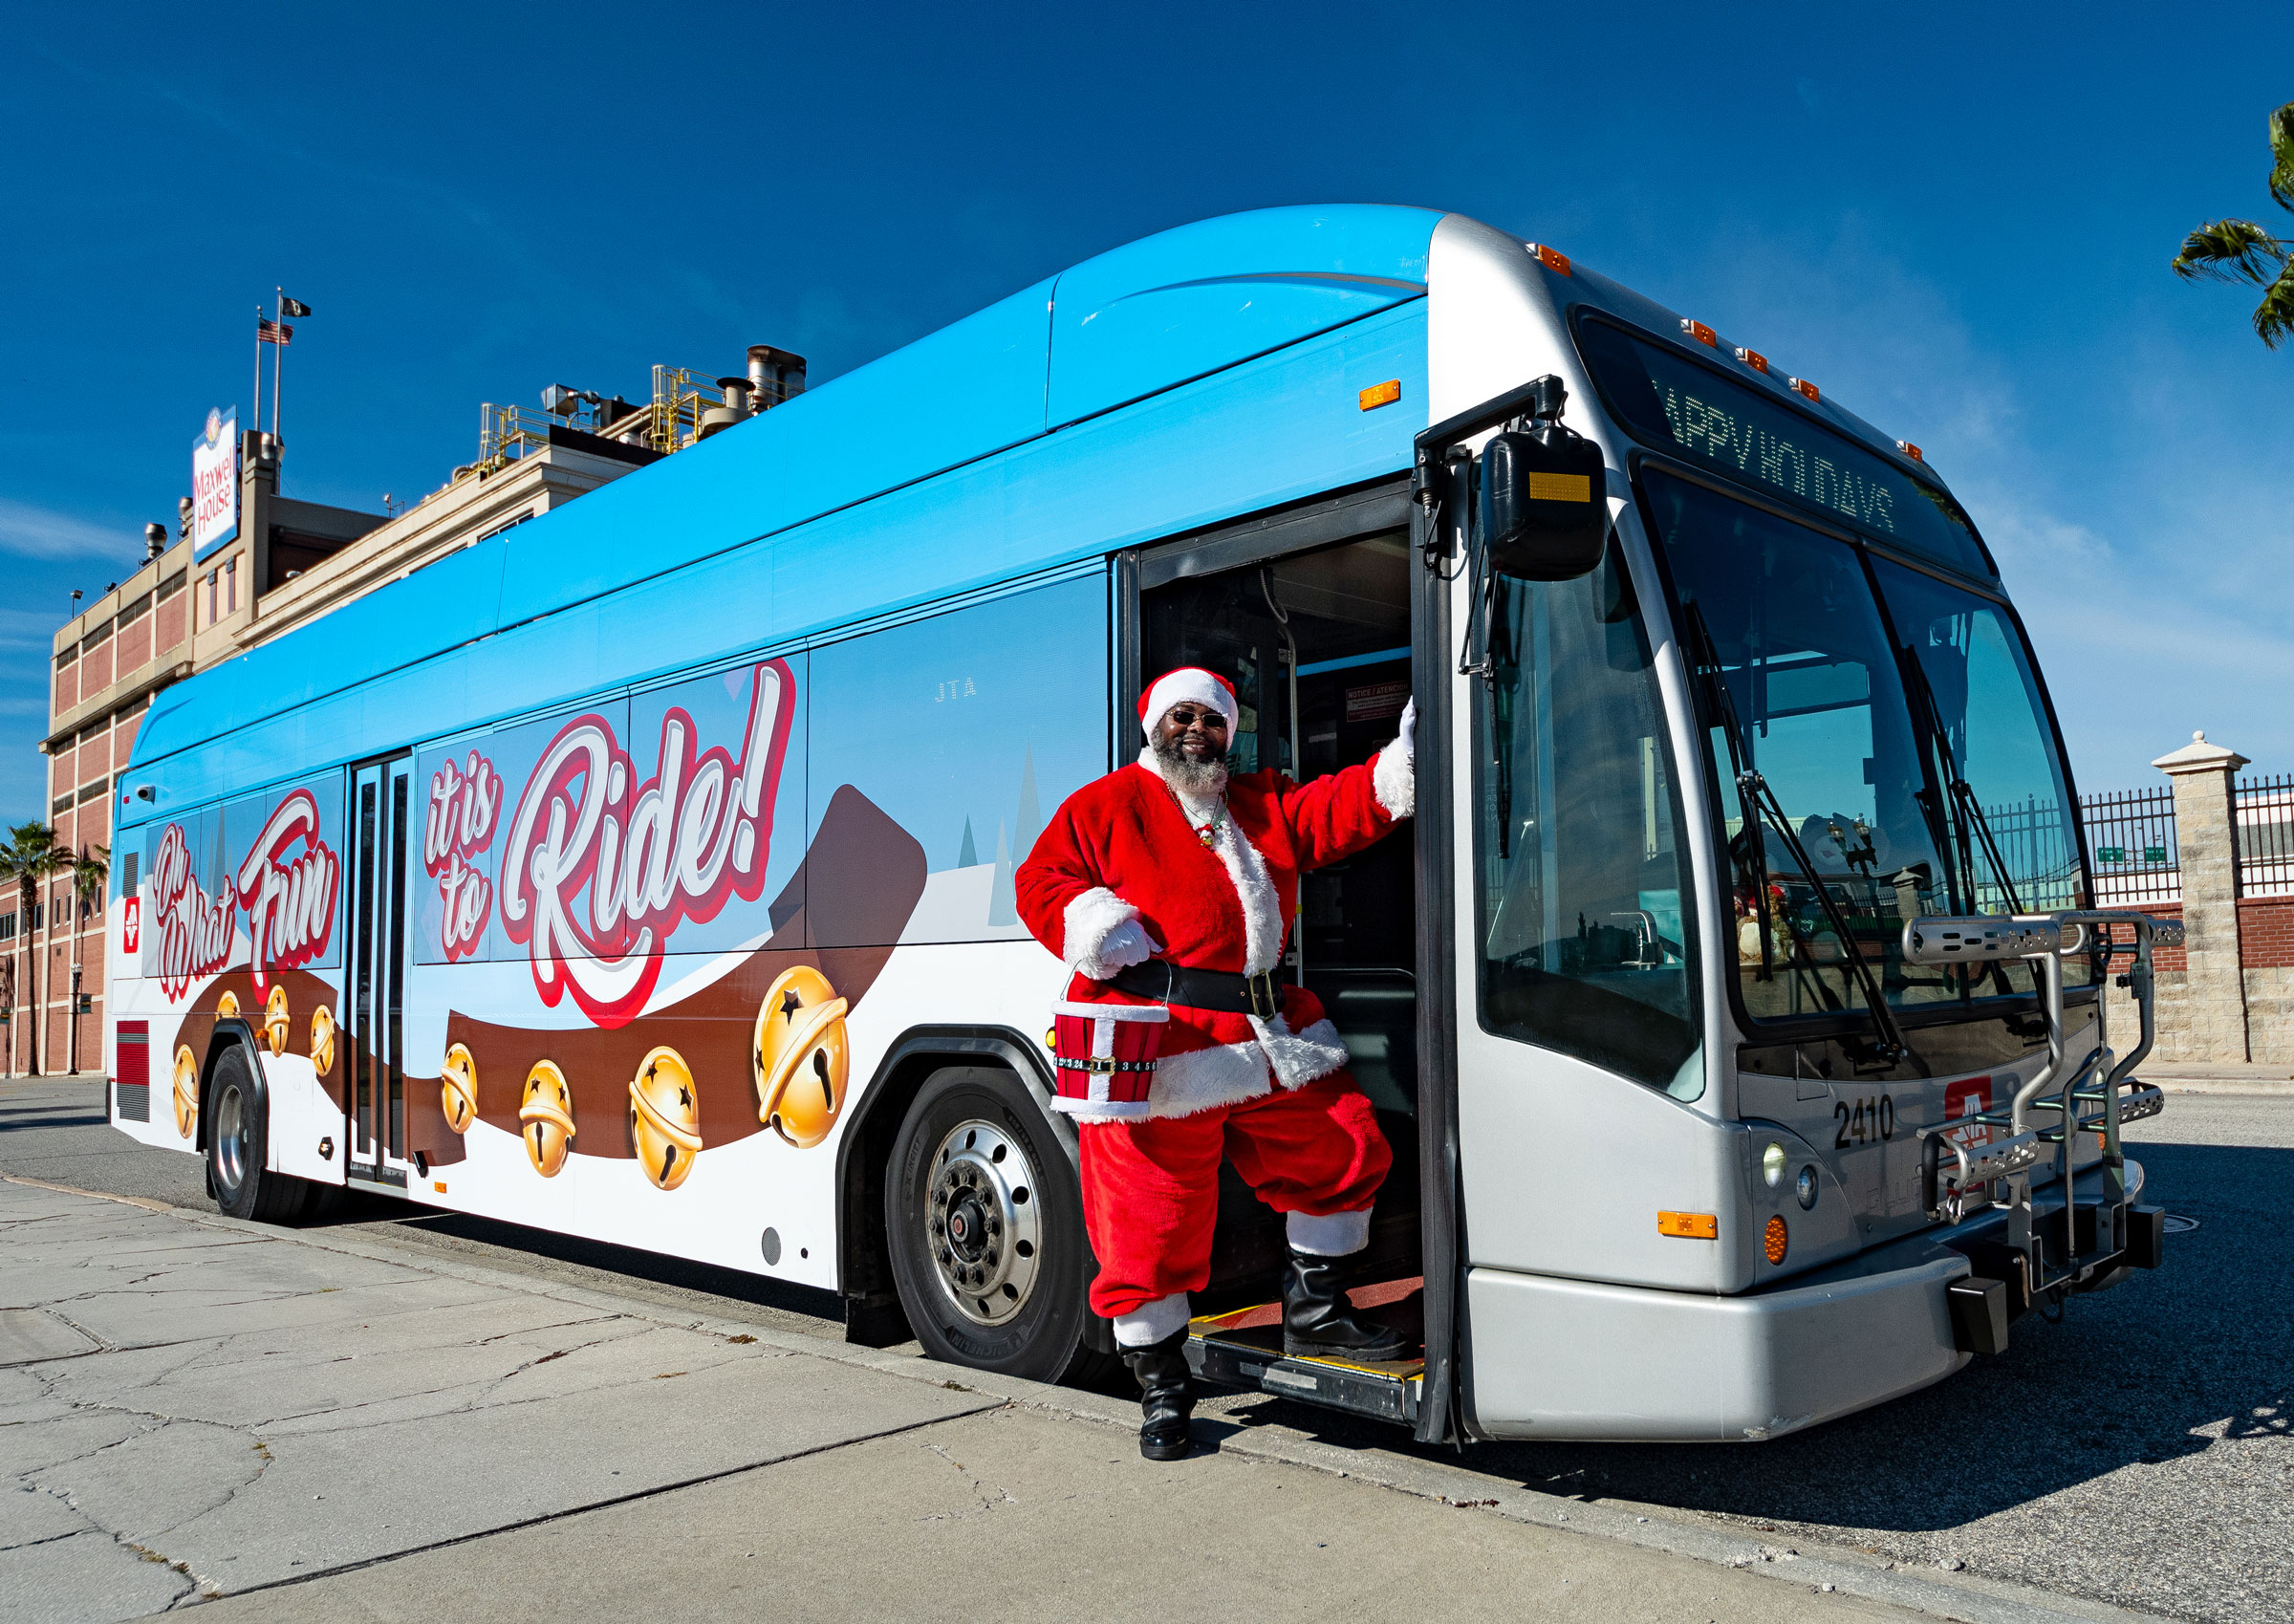 A Jacksonville Transportation Authority bus is parked along on a city street with winter holiday graphics shown on the side. A bus driver dressed as Santa is standing beside the bus.